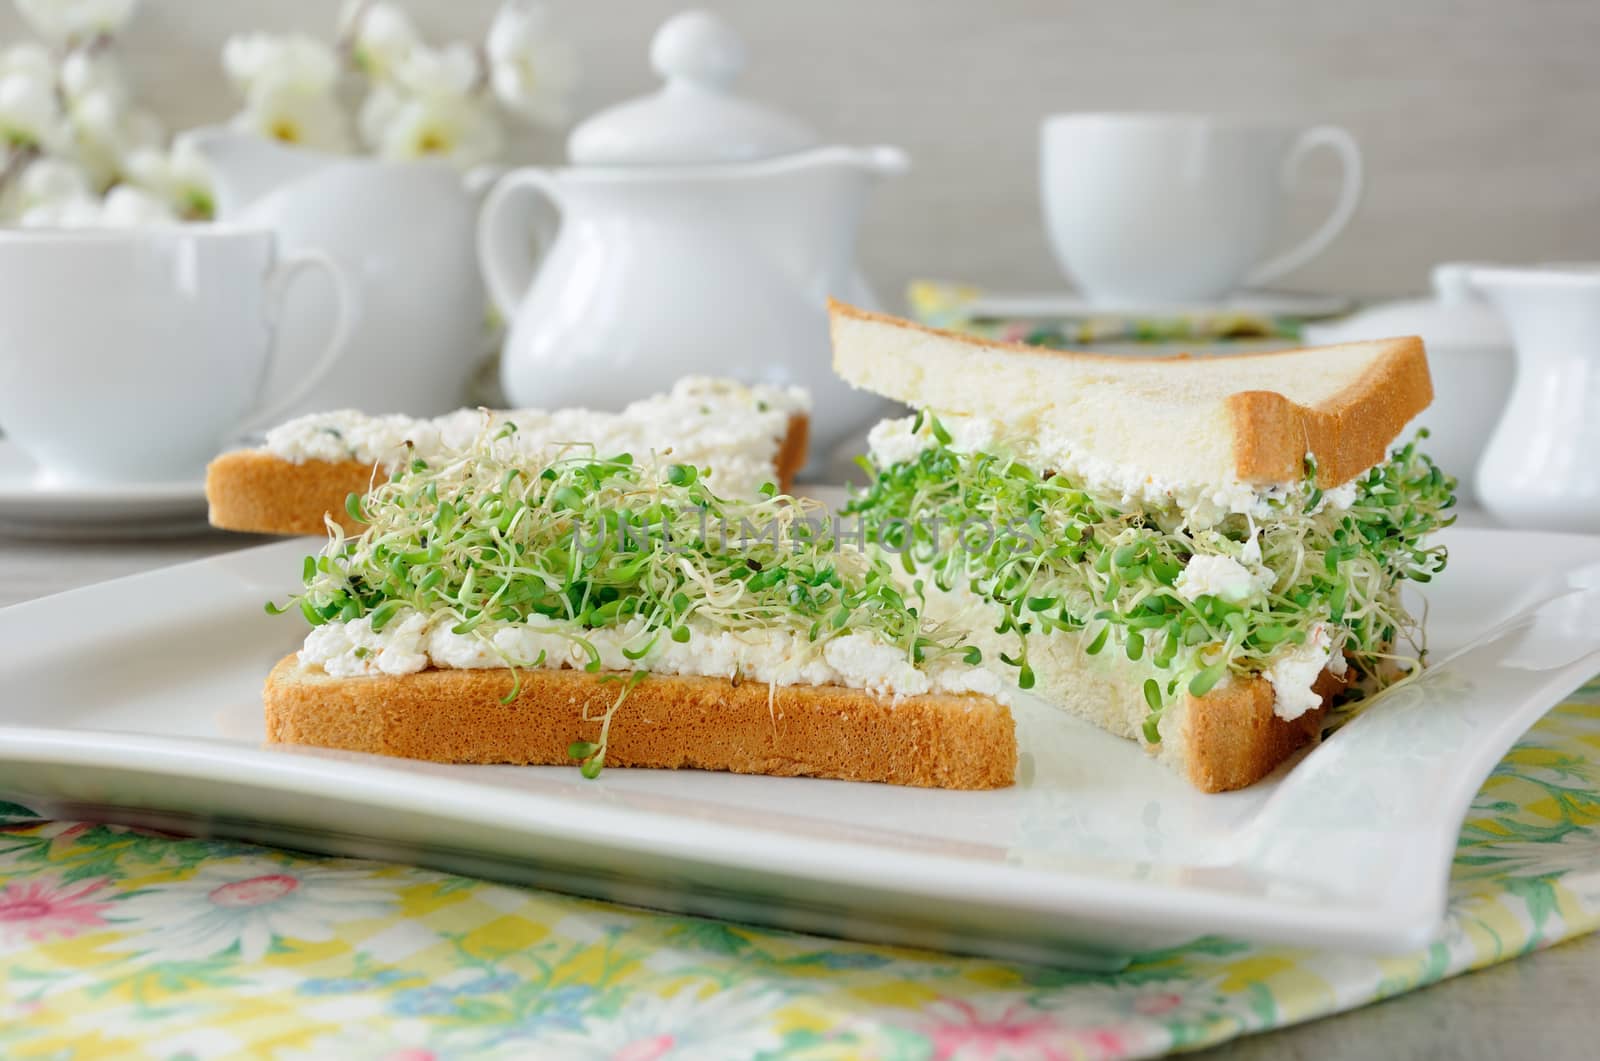 Sandwich with ricotta and alfalfa sprouts by Apolonia